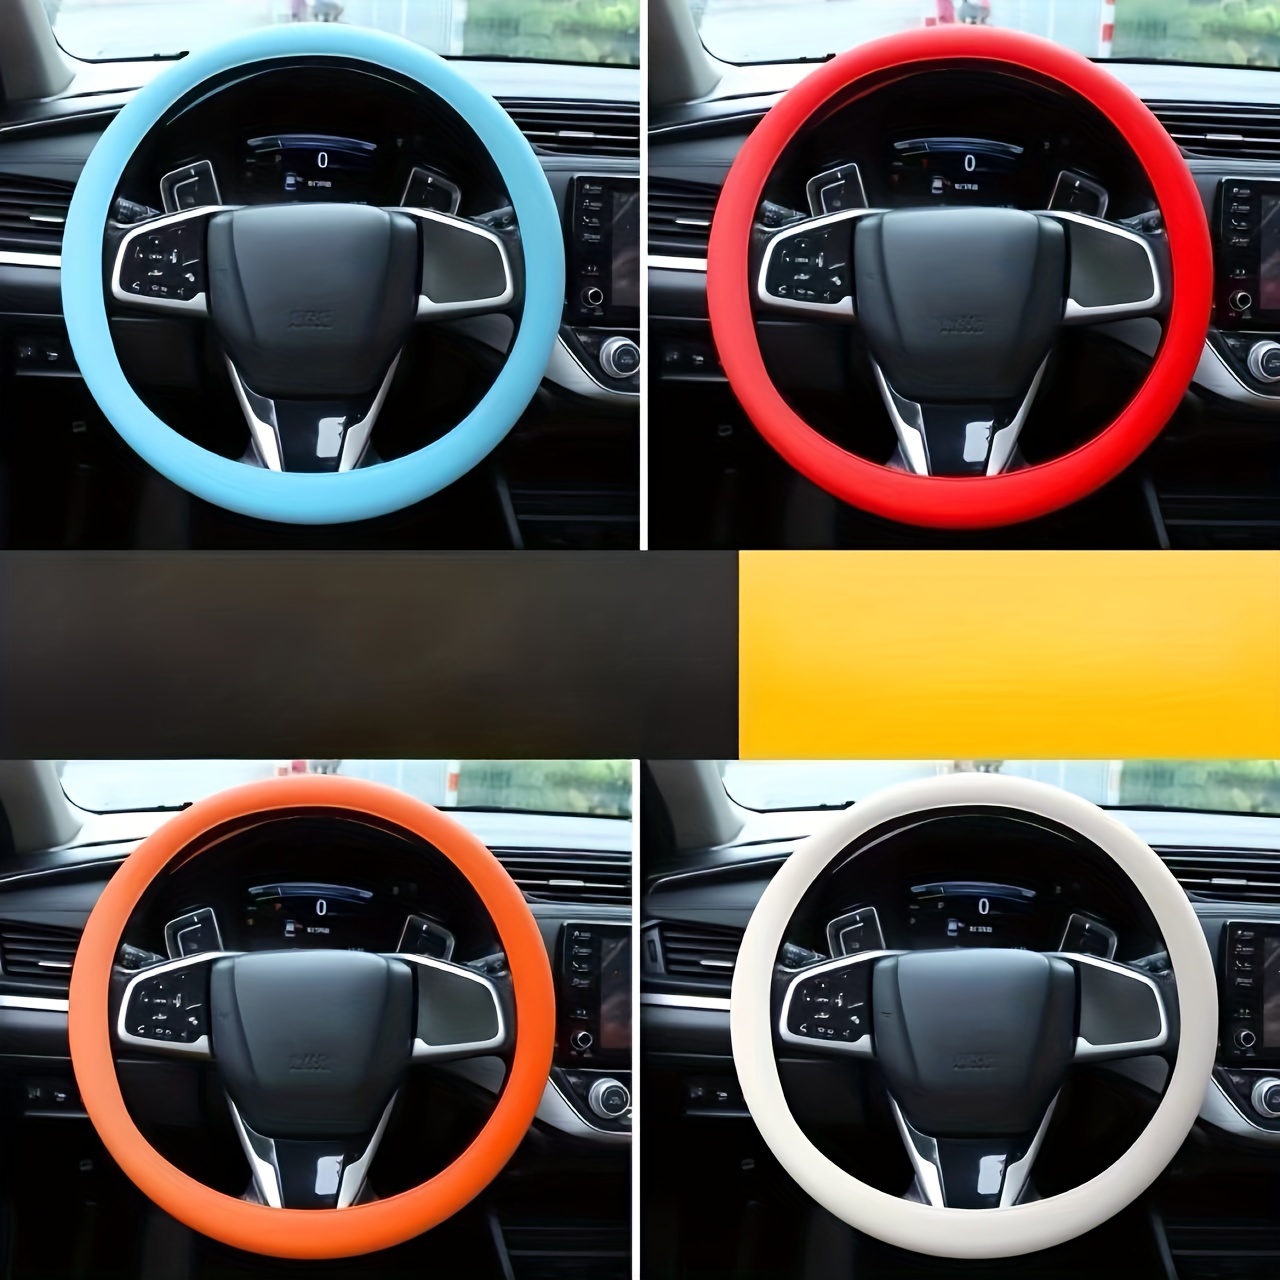 

Universal Fit Silicone Steering Wheel Cover, Anti-slip Stretchable Steering Wheel Protector, Elastic Grip Car Accessory For Most Vehicles